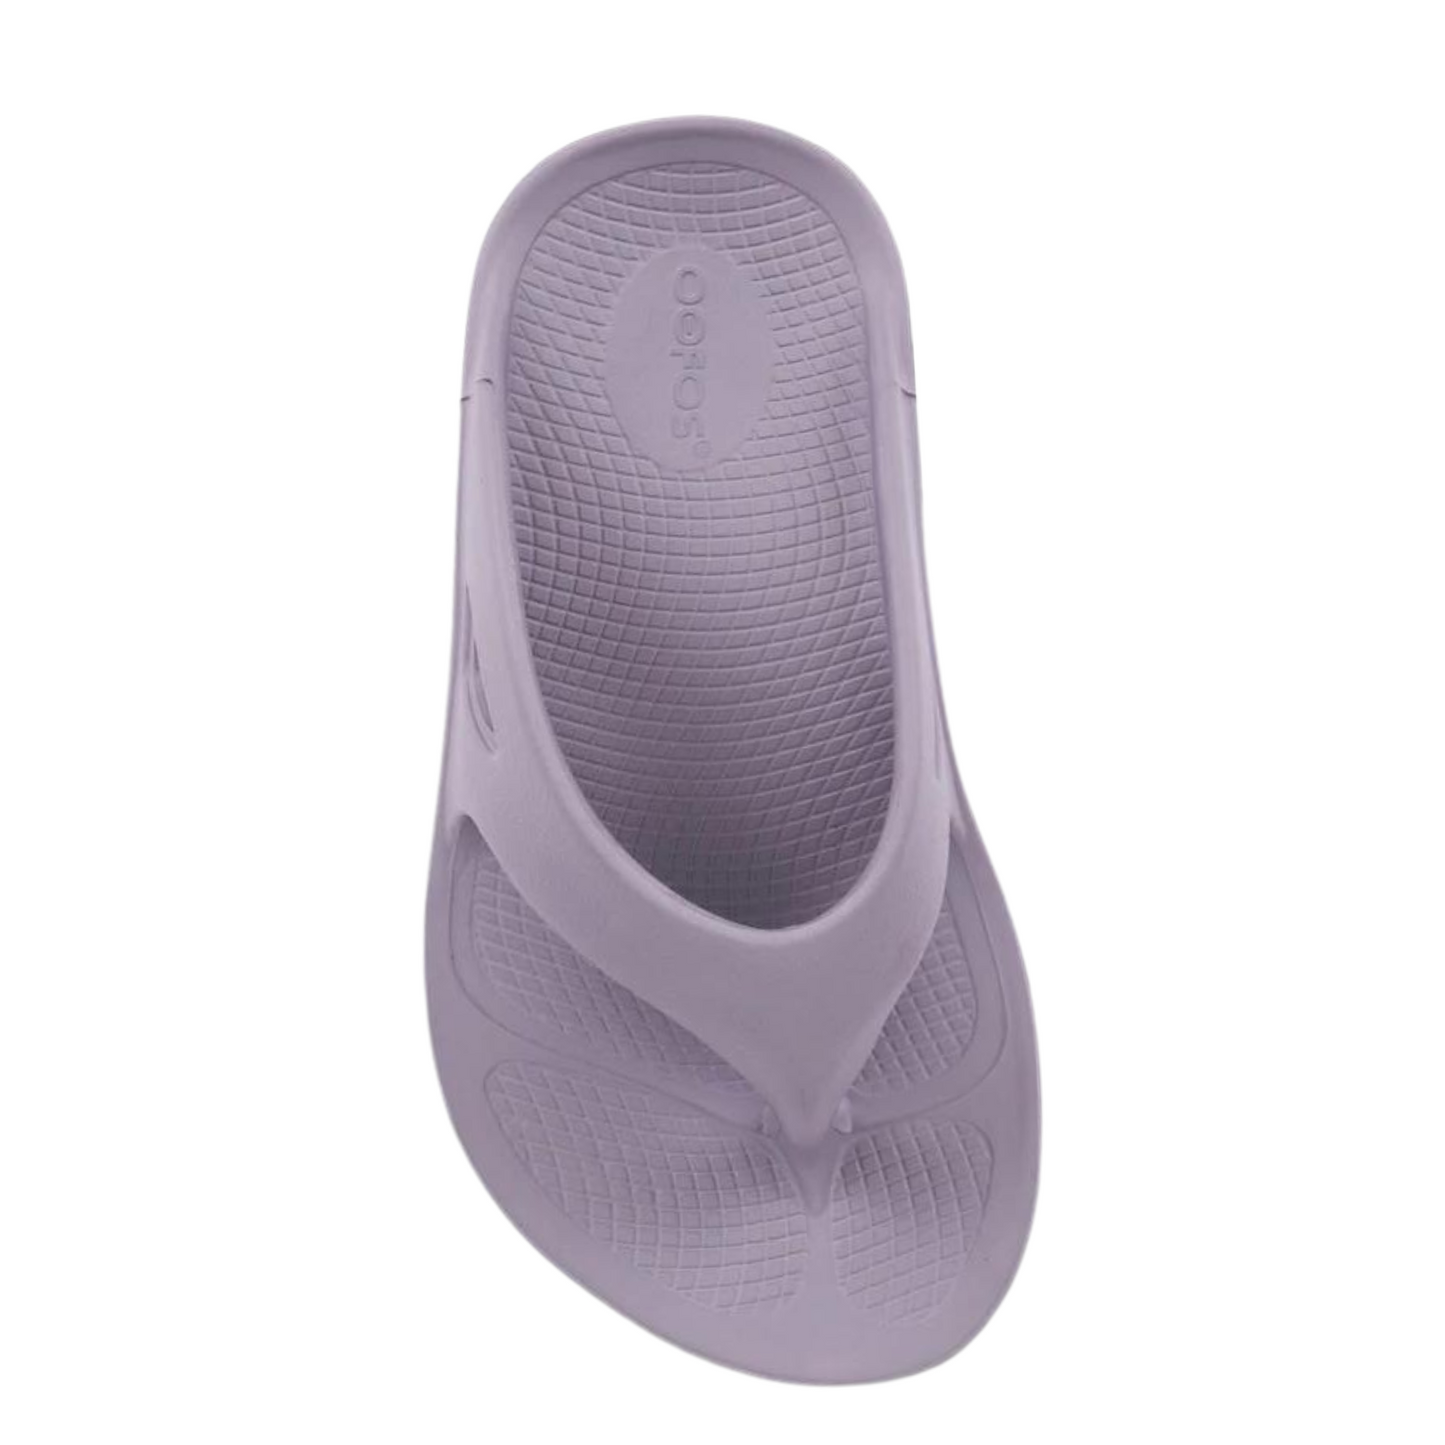 A top view of a light purple foam sandal with a between-toe strap.